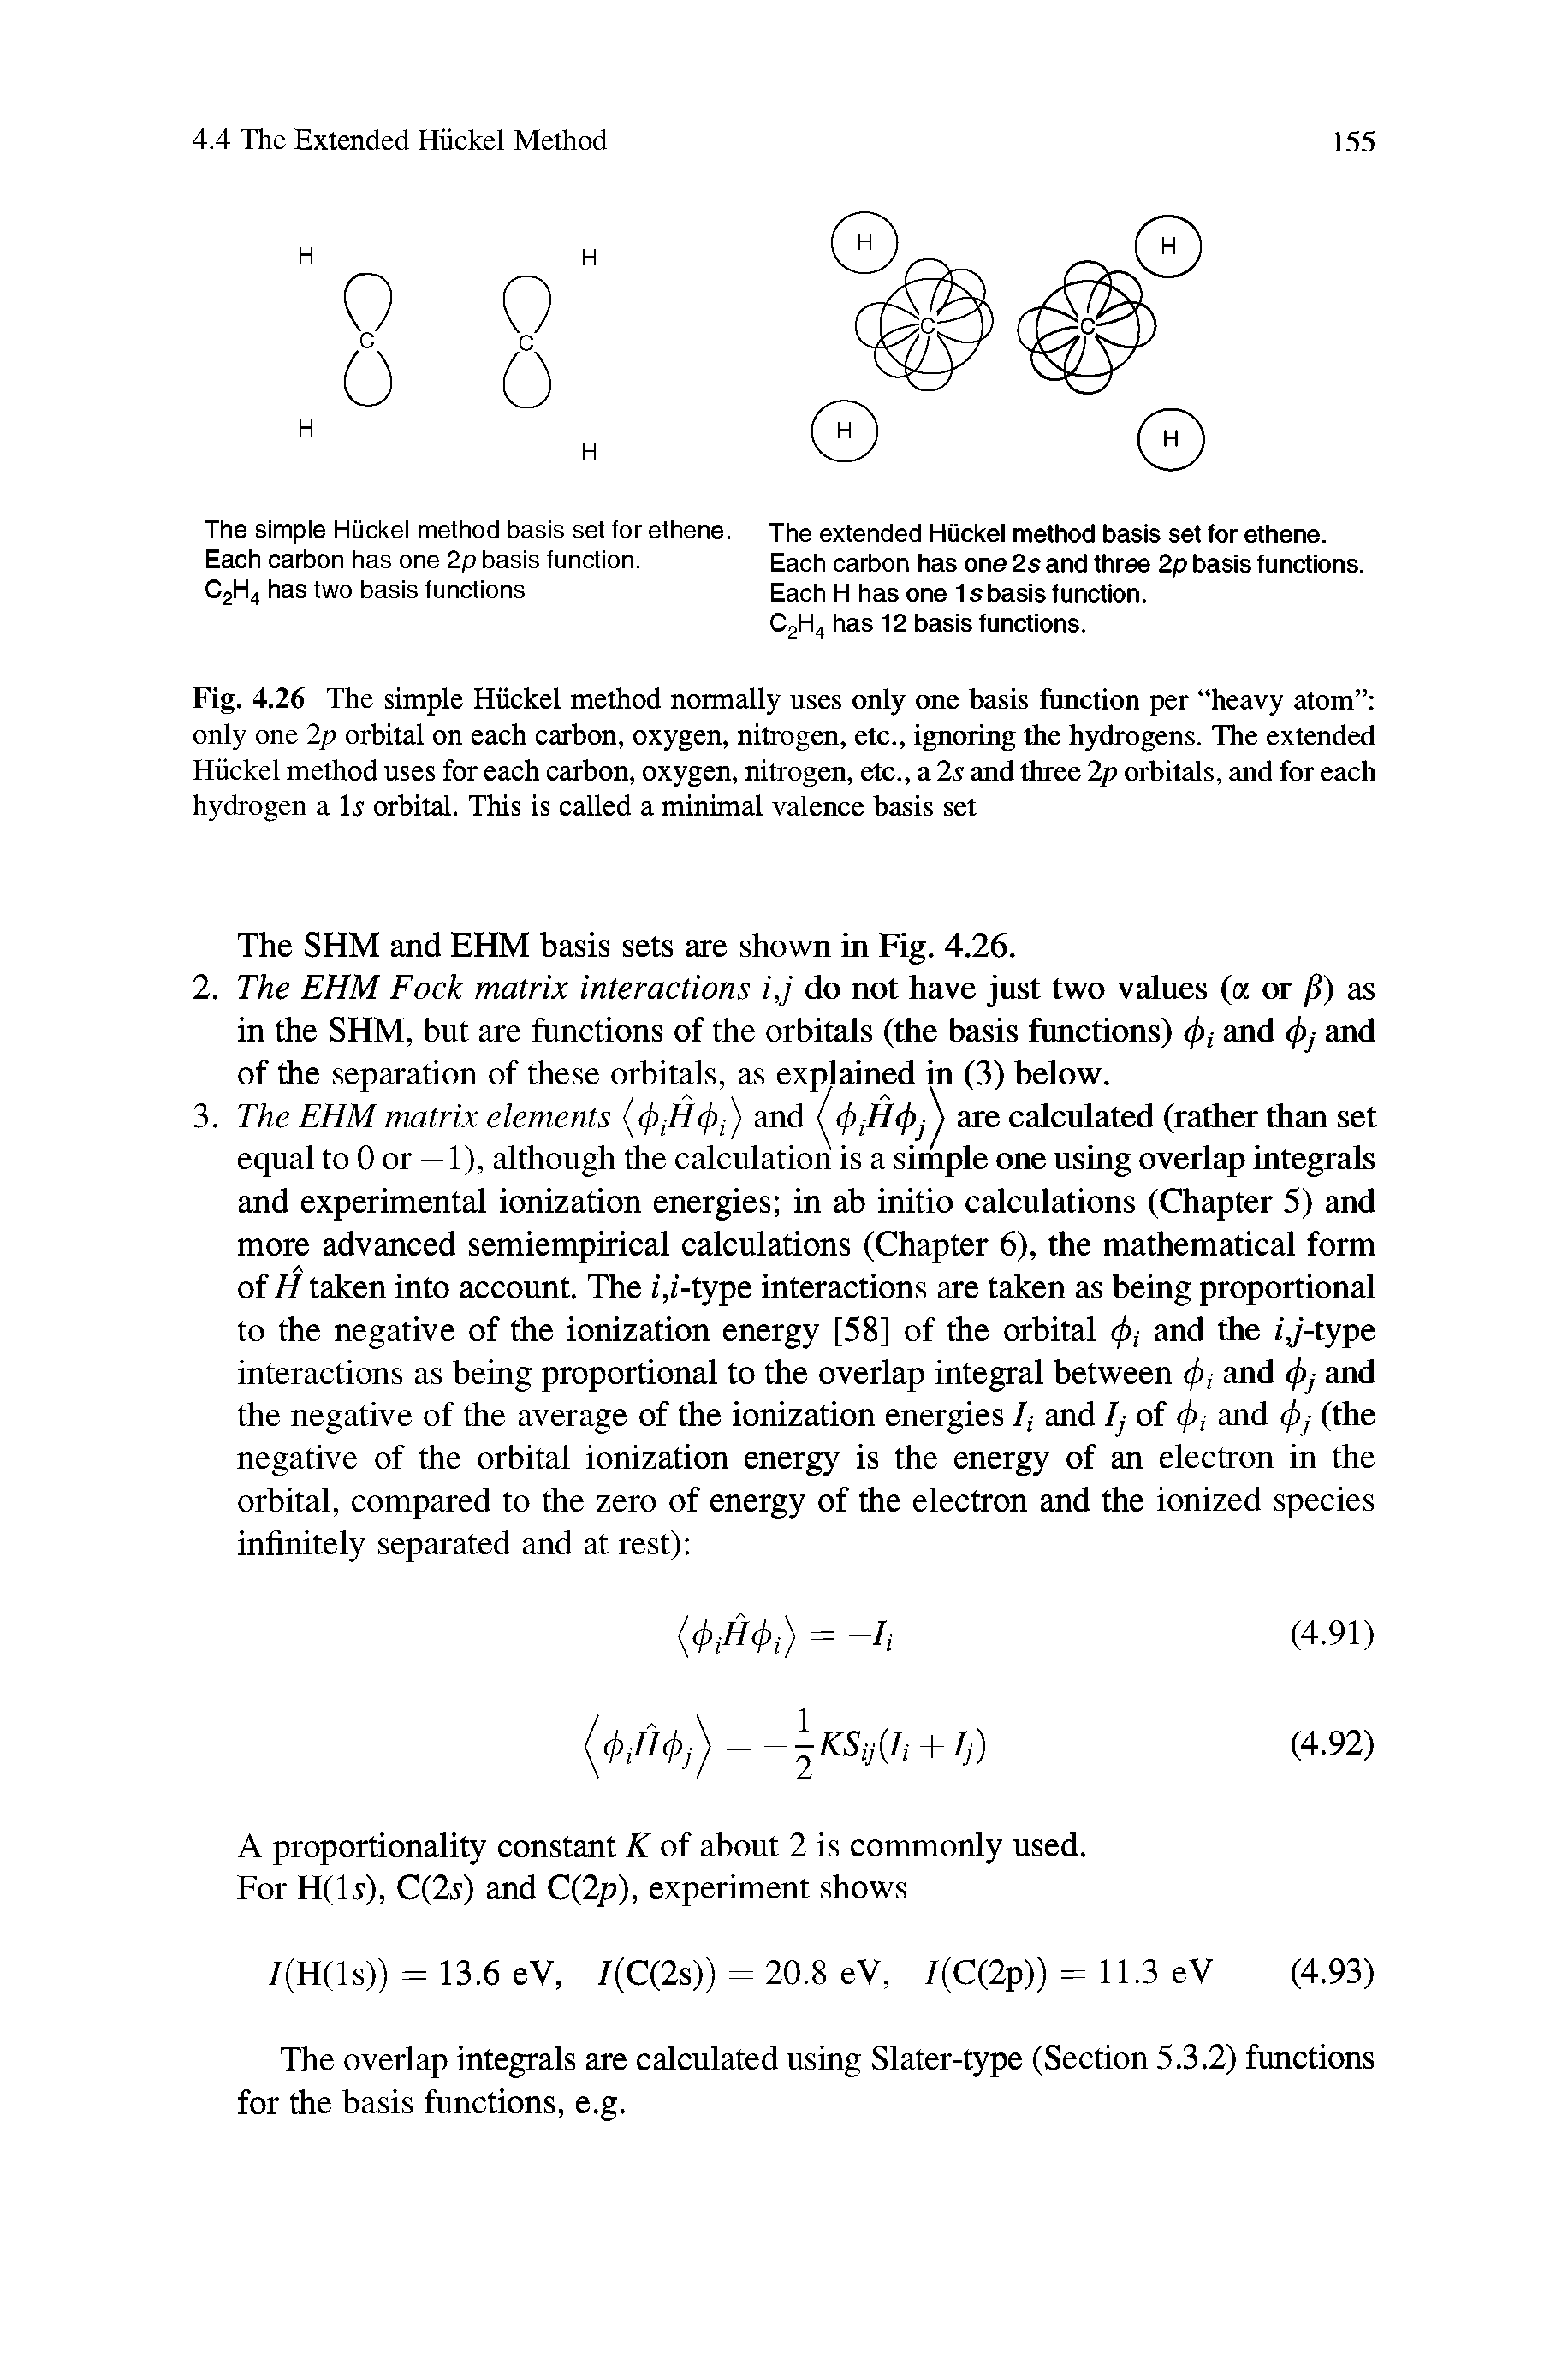 Fig. 4.26 The simple Huckel method normally uses only one basis function per heavy atom only one 2p orbital on each carbon, oxygen, nitrogen, etc., ignoring the hydrogens. The extended Huckel method uses for each carbon, oxygen, nitrogen, etc., a 2s and three 2p orbitals, and for each hydrogen a Is orbital. This is called a minimal valence basis set...